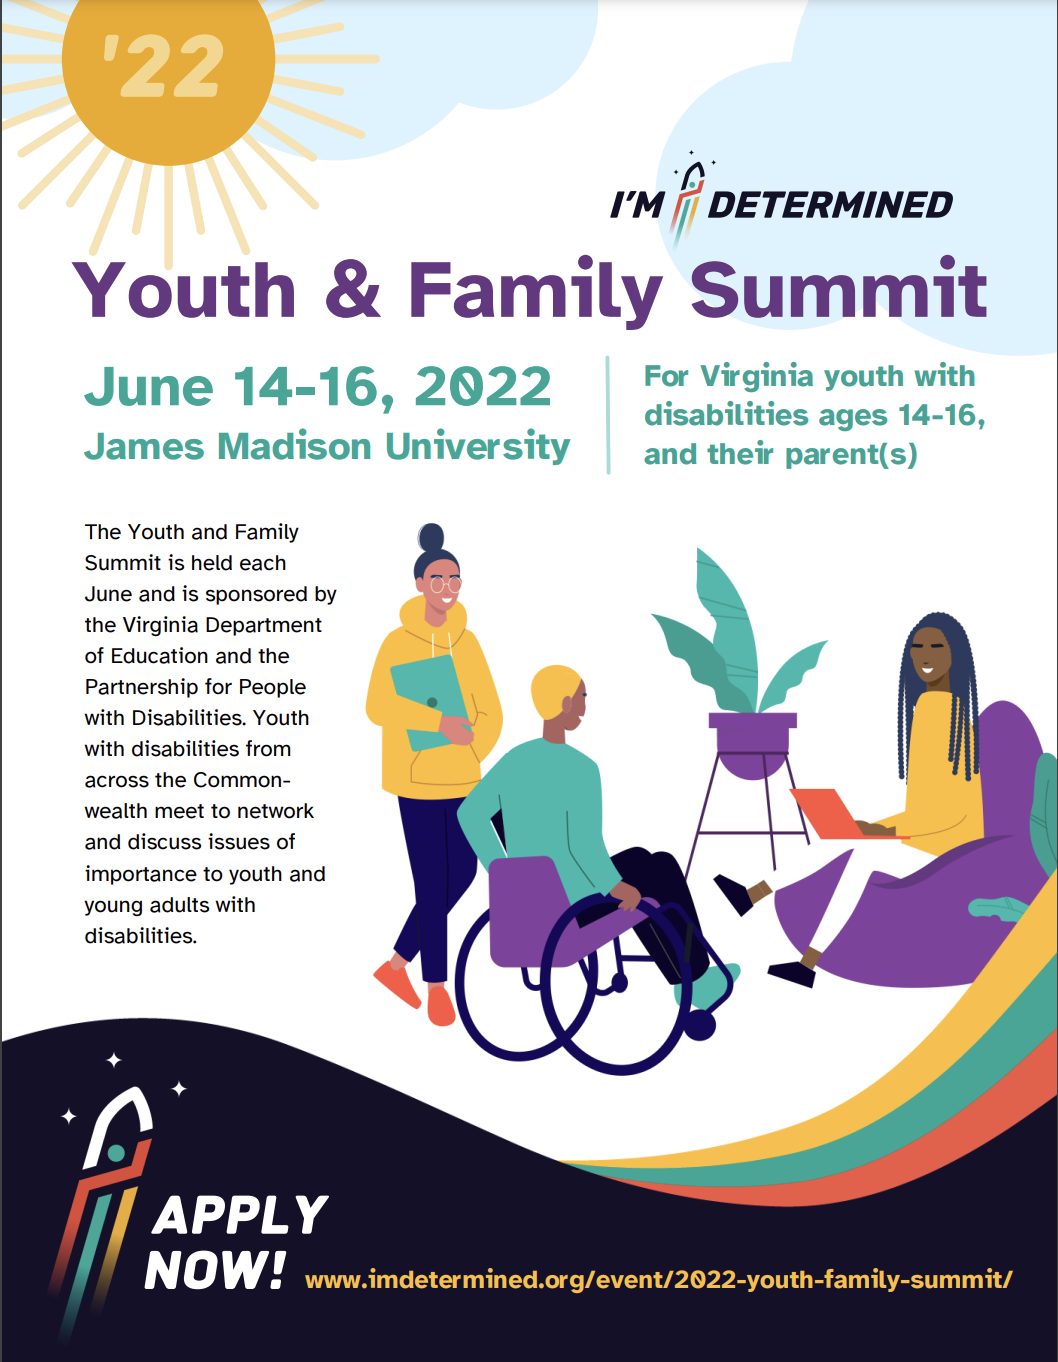 Youth & Family Summit – June 14-16, 2022